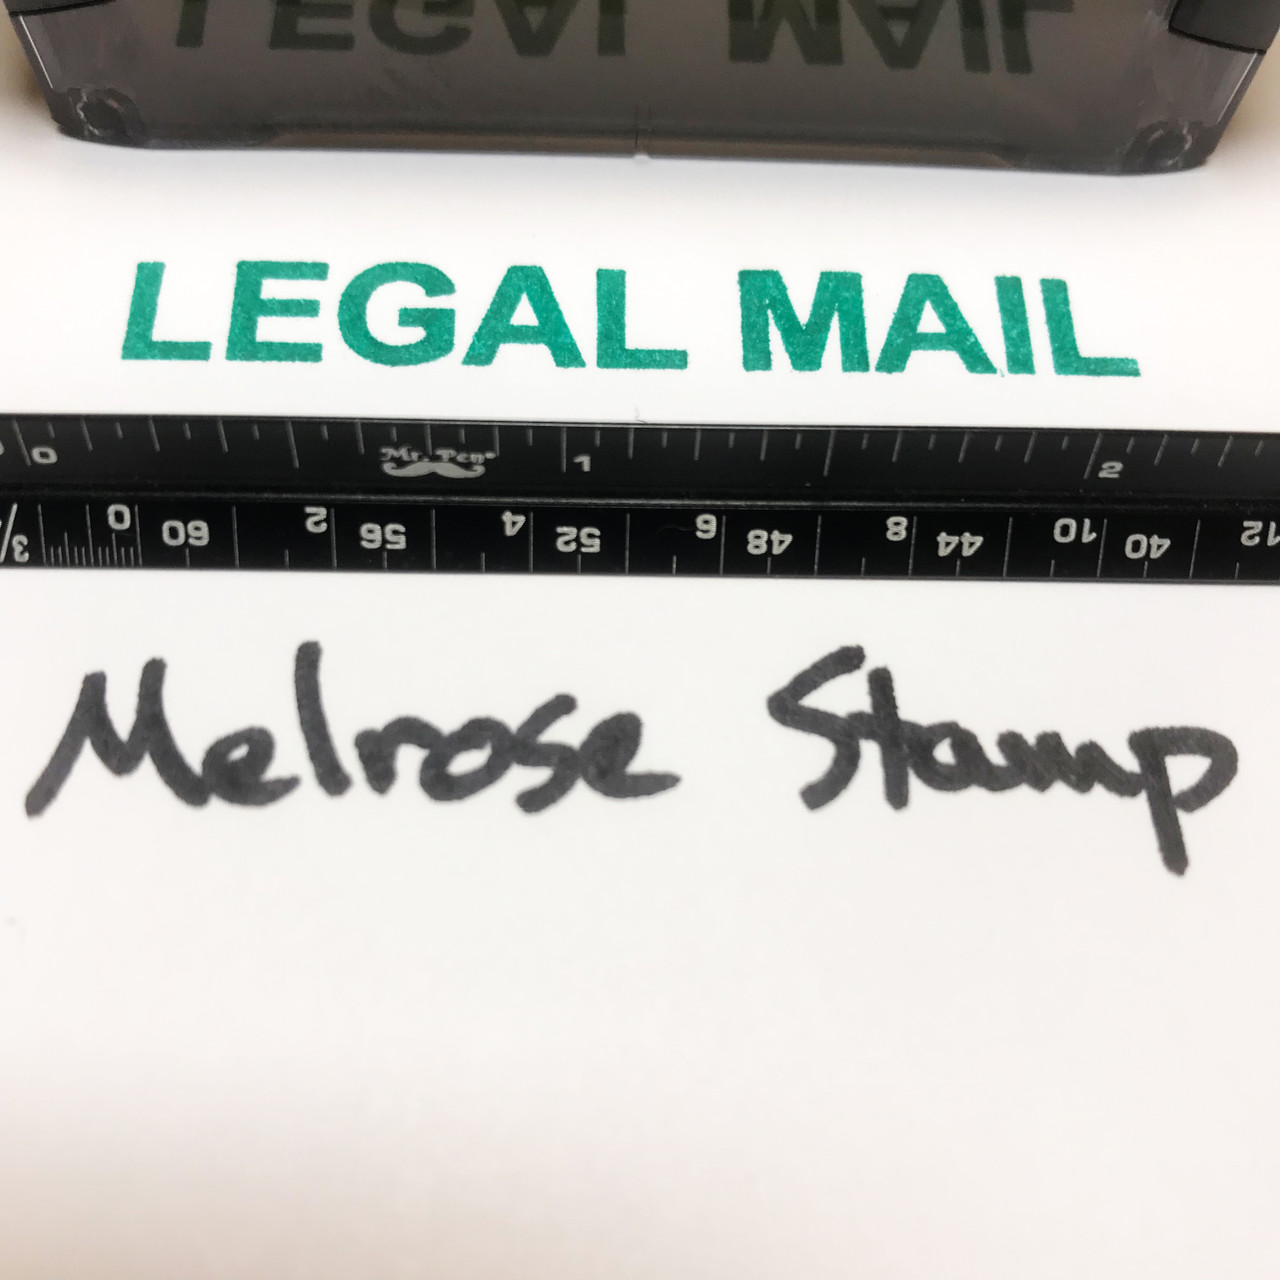 Legal Mail Rubber Stamp For Mail Use Self Inking Melrose Stamp Company 4994